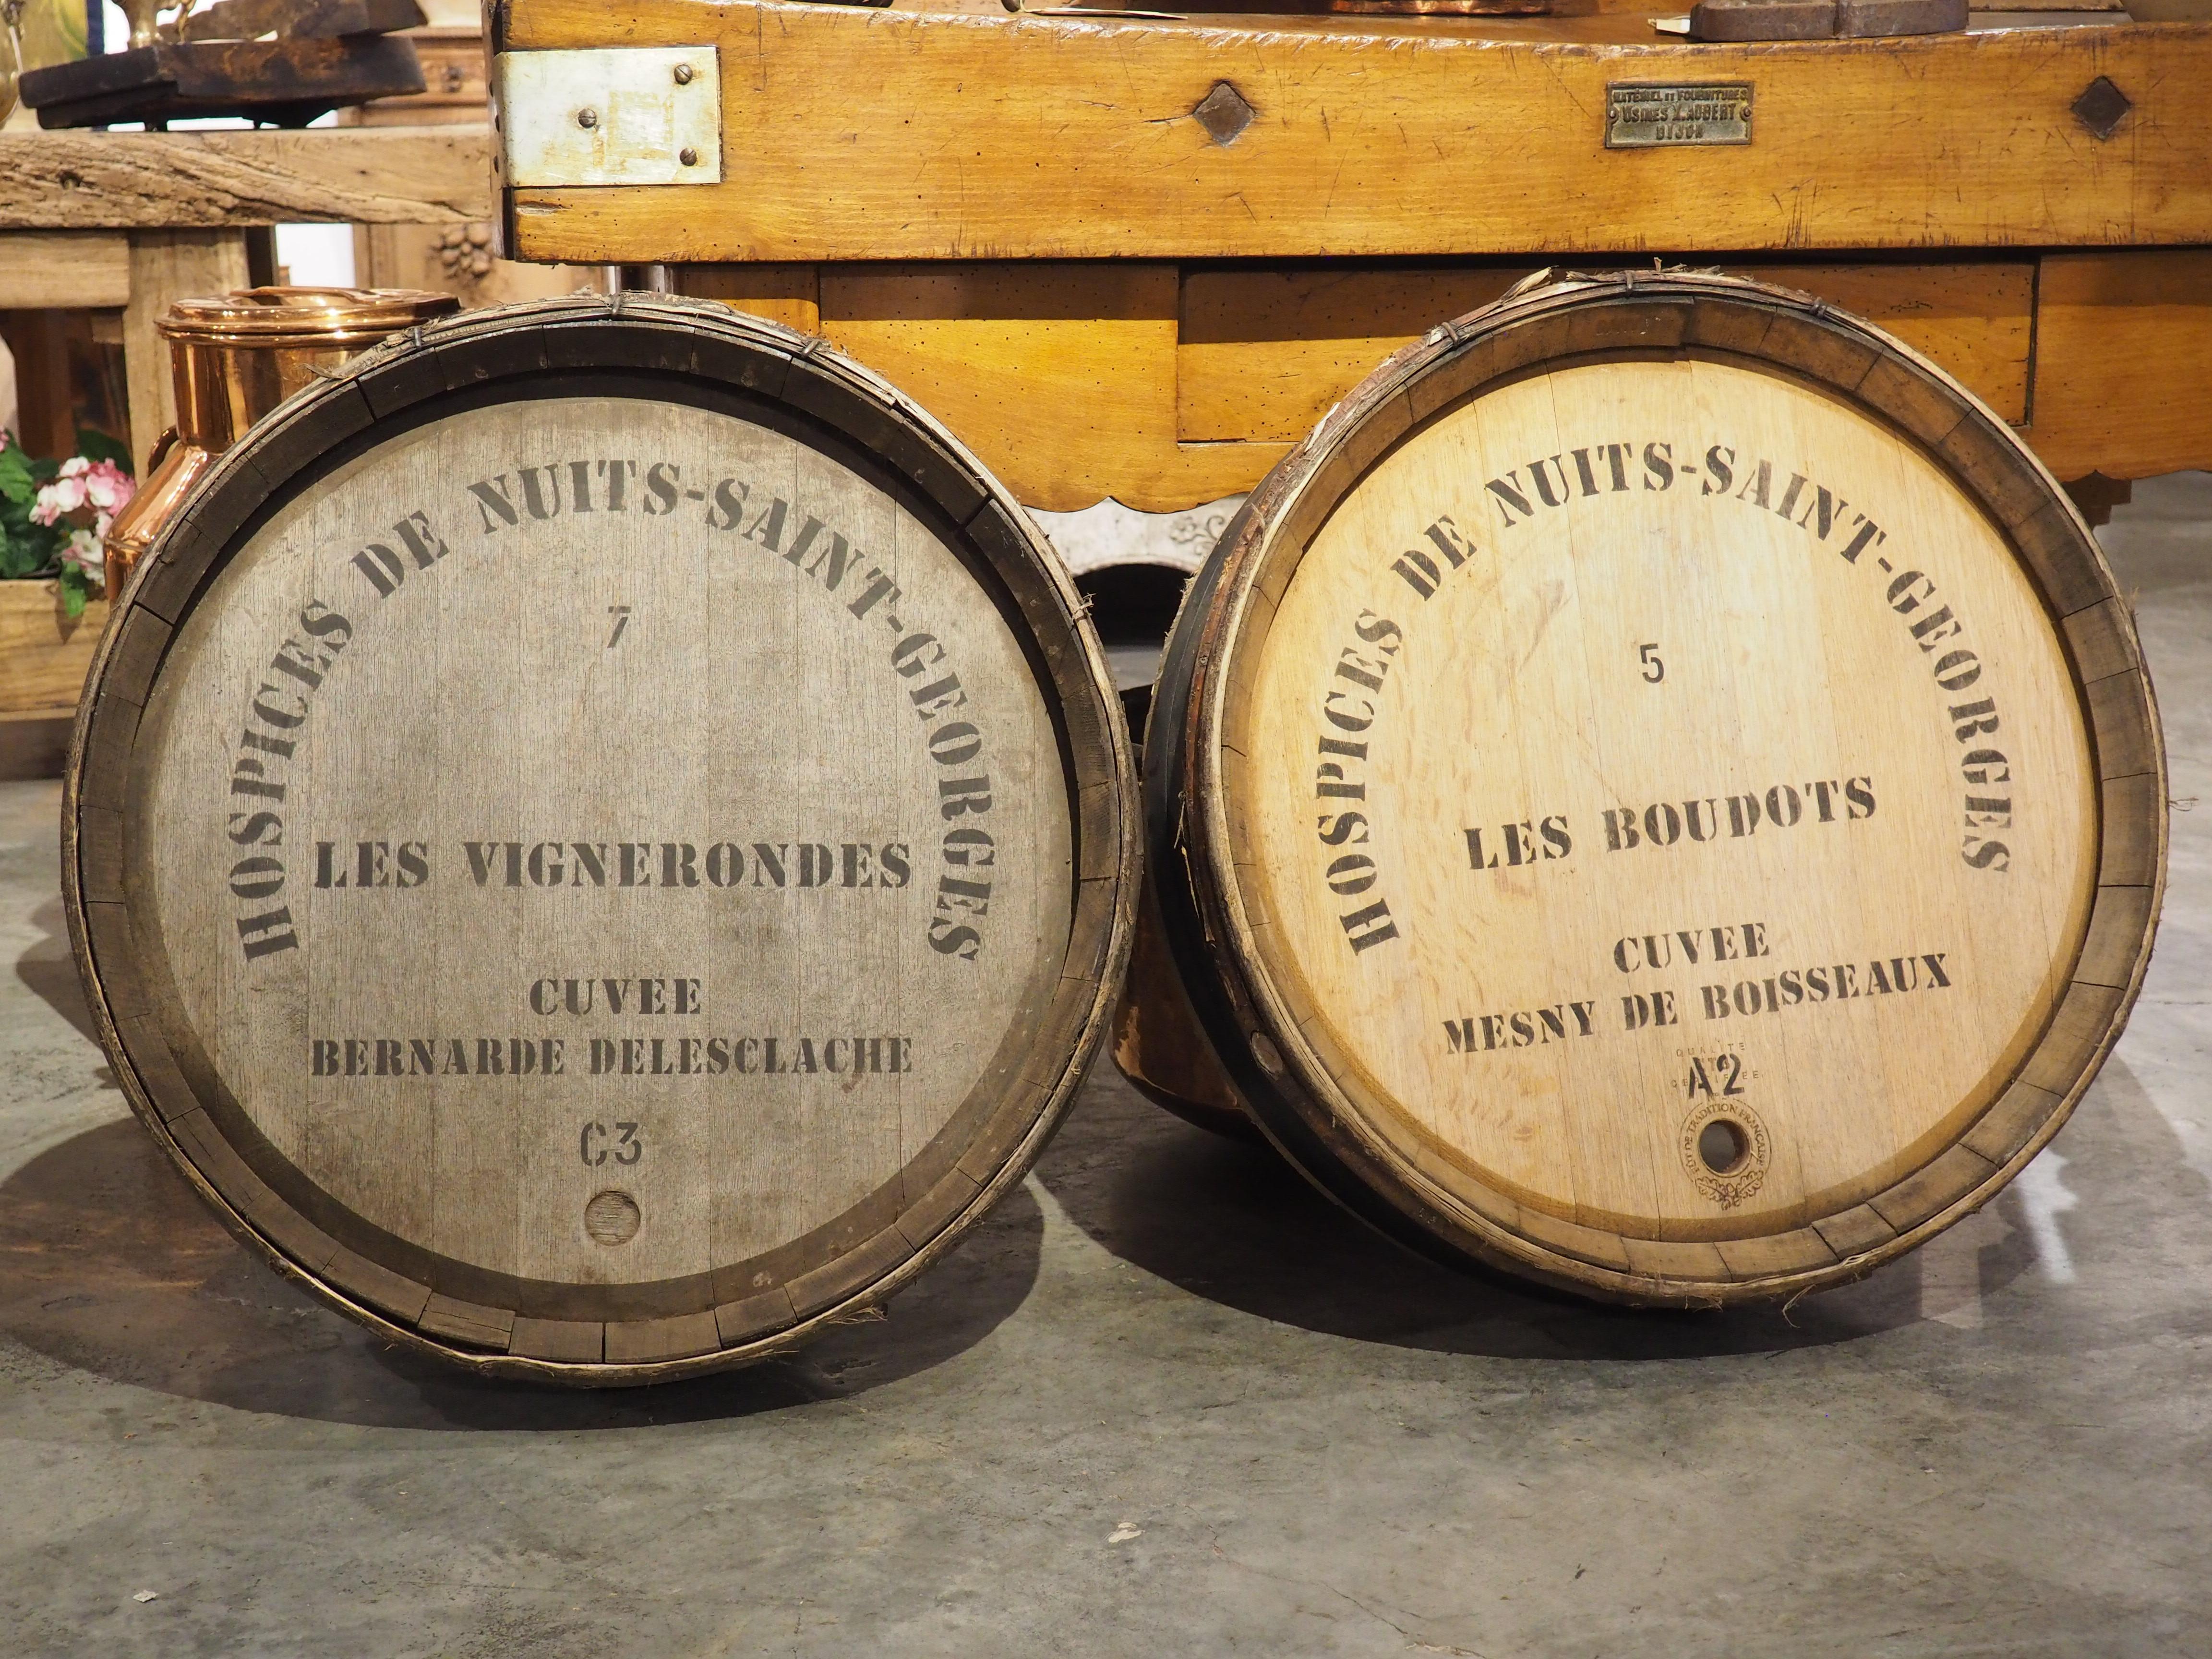 Pair of French Wine Barrel Facades, “Hospices de Nuits-Saint-Georges”, 1900s For Sale 4